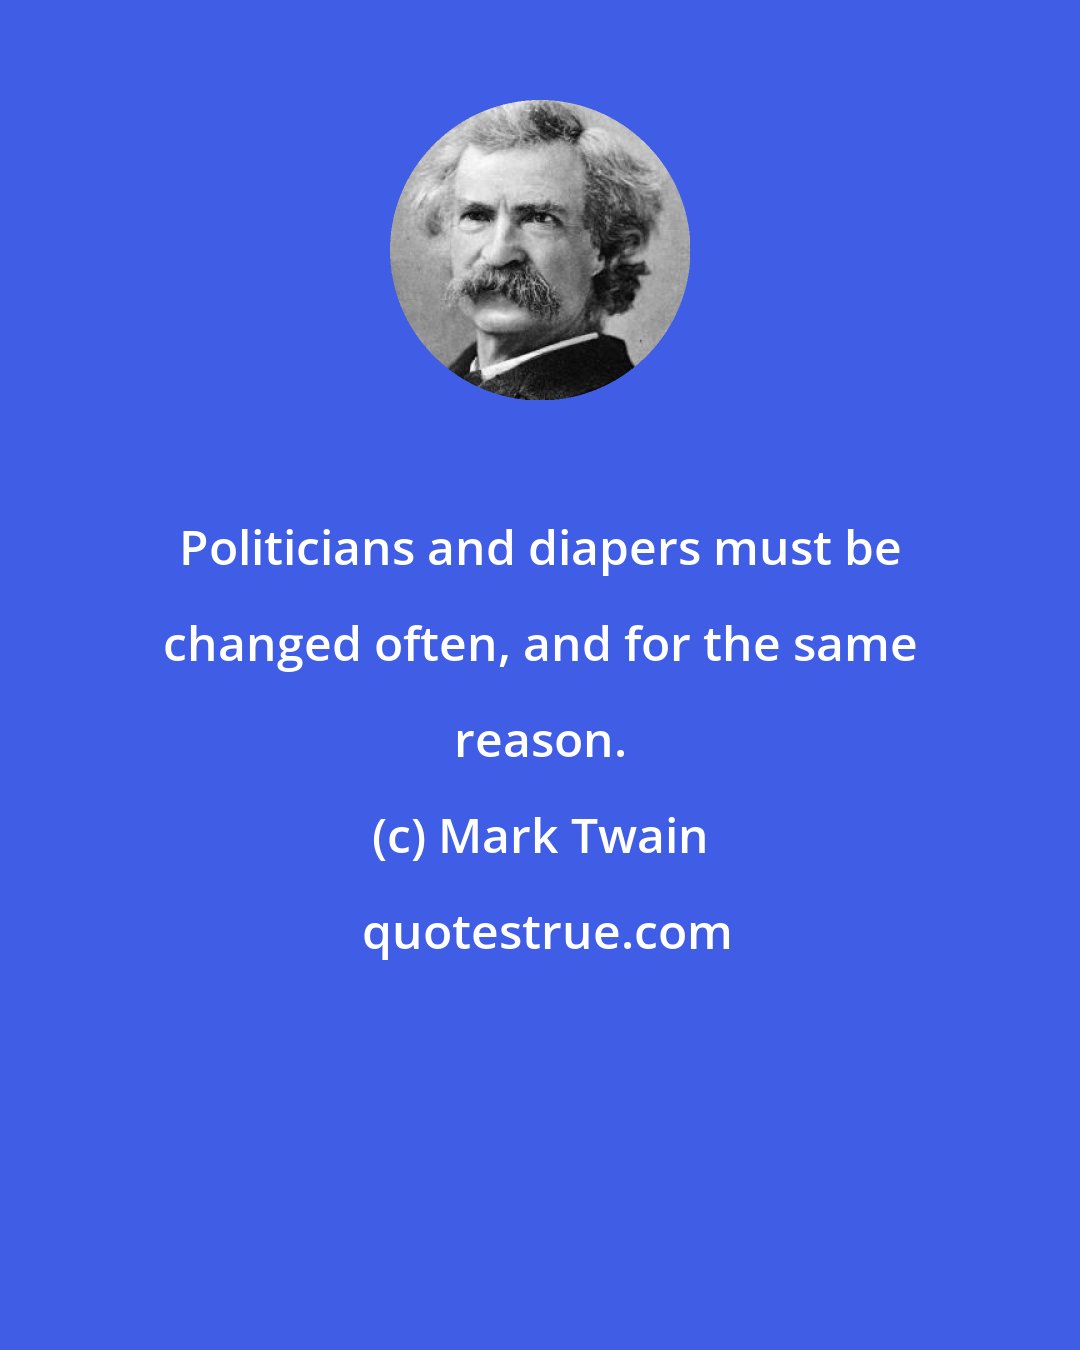 Mark Twain: Politicians and diapers must be changed often, and for the same reason.